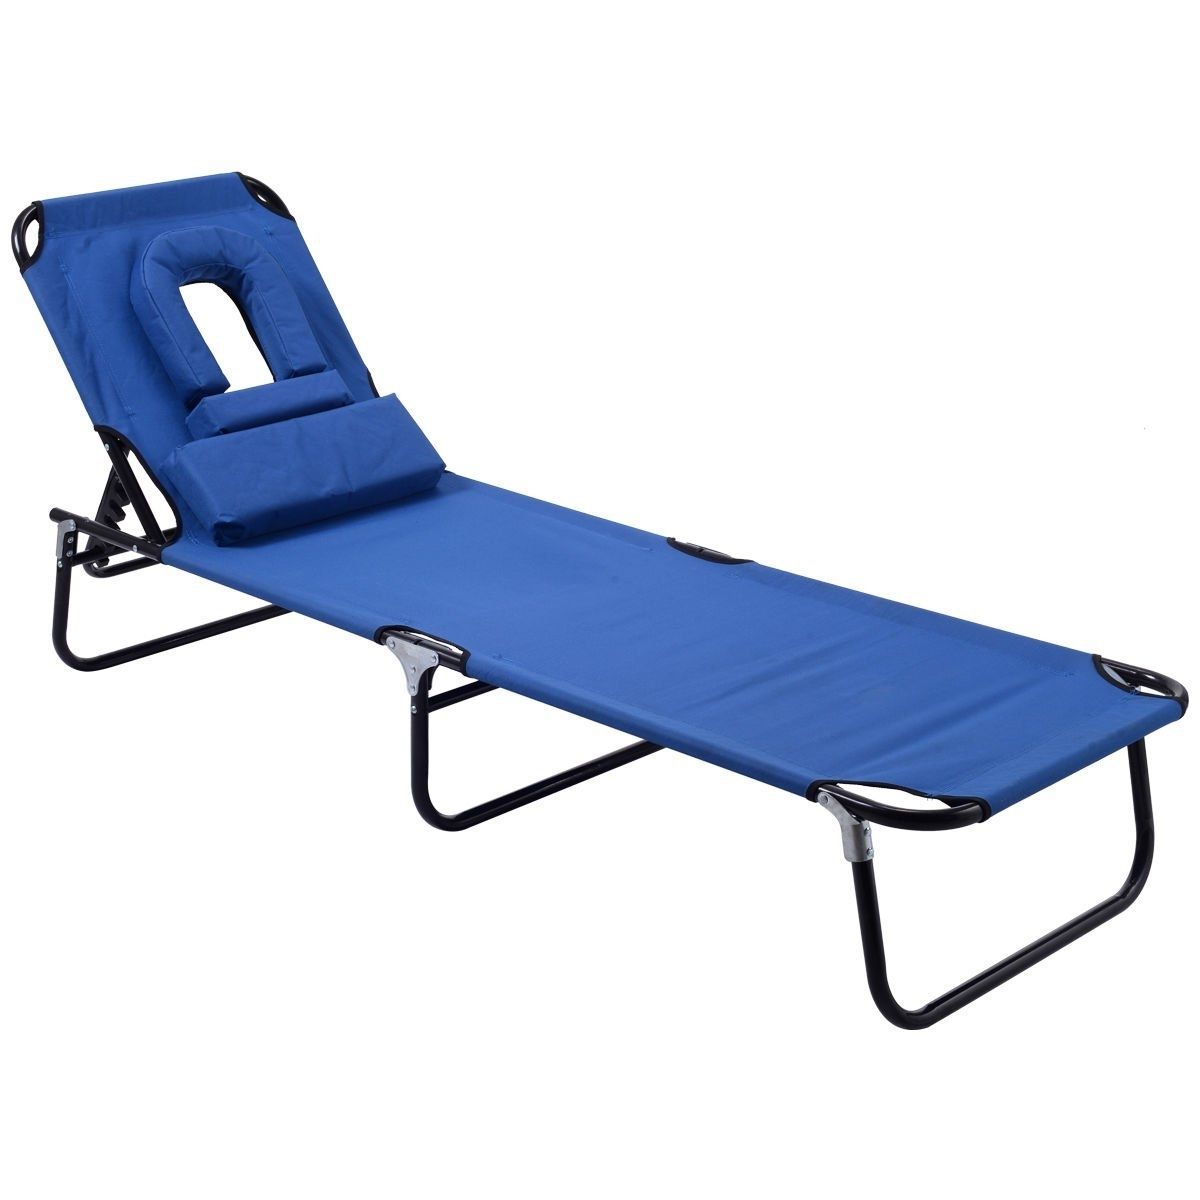 Outdoor : Lowes Outdoor Double Chaise Lounge Costco Patio Regarding Well Known Chaise Lounge Chairs For Outdoor (View 11 of 15)